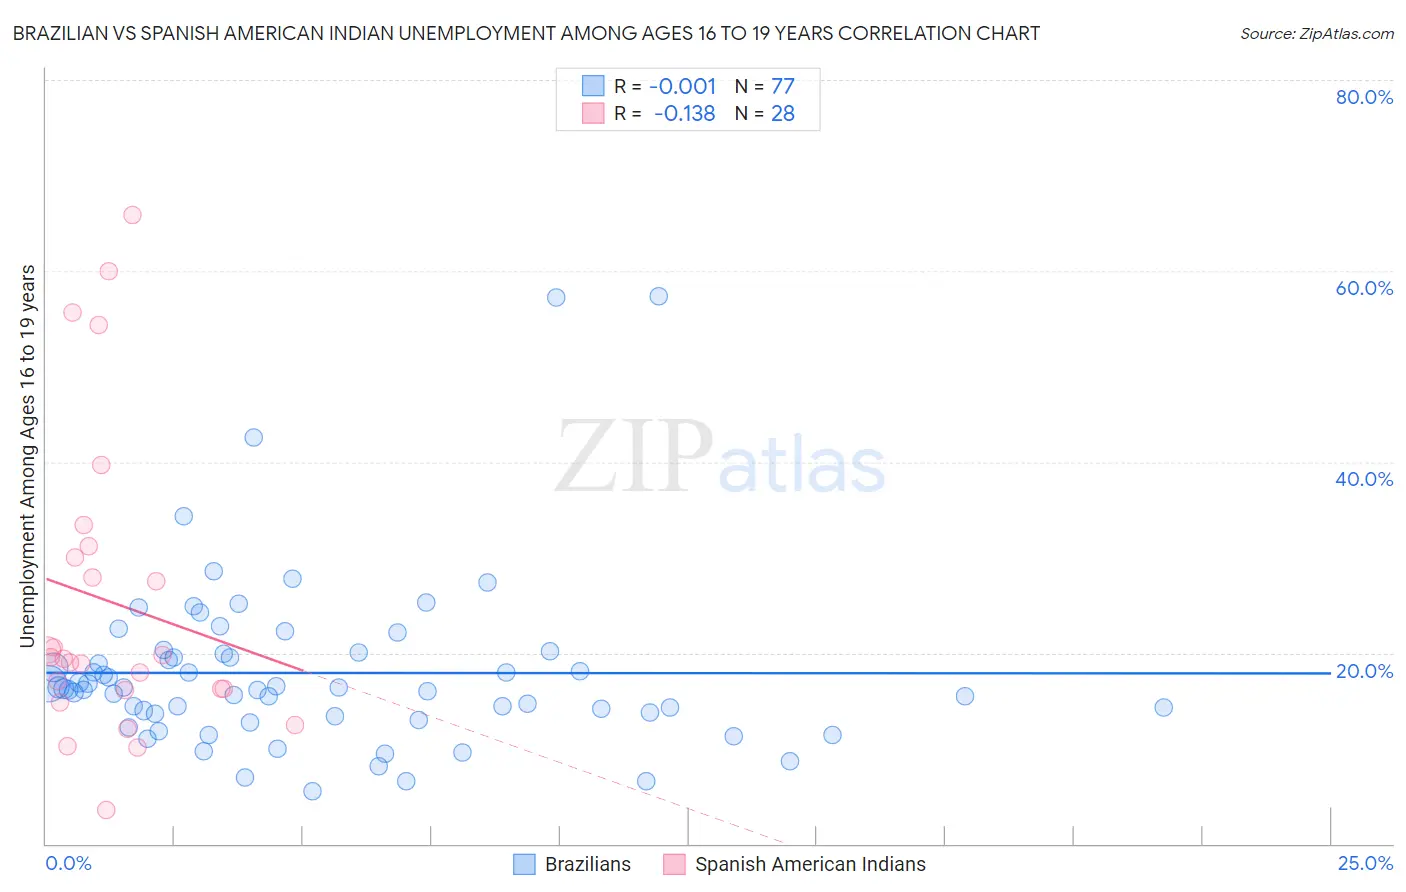 Brazilian vs Spanish American Indian Unemployment Among Ages 16 to 19 years